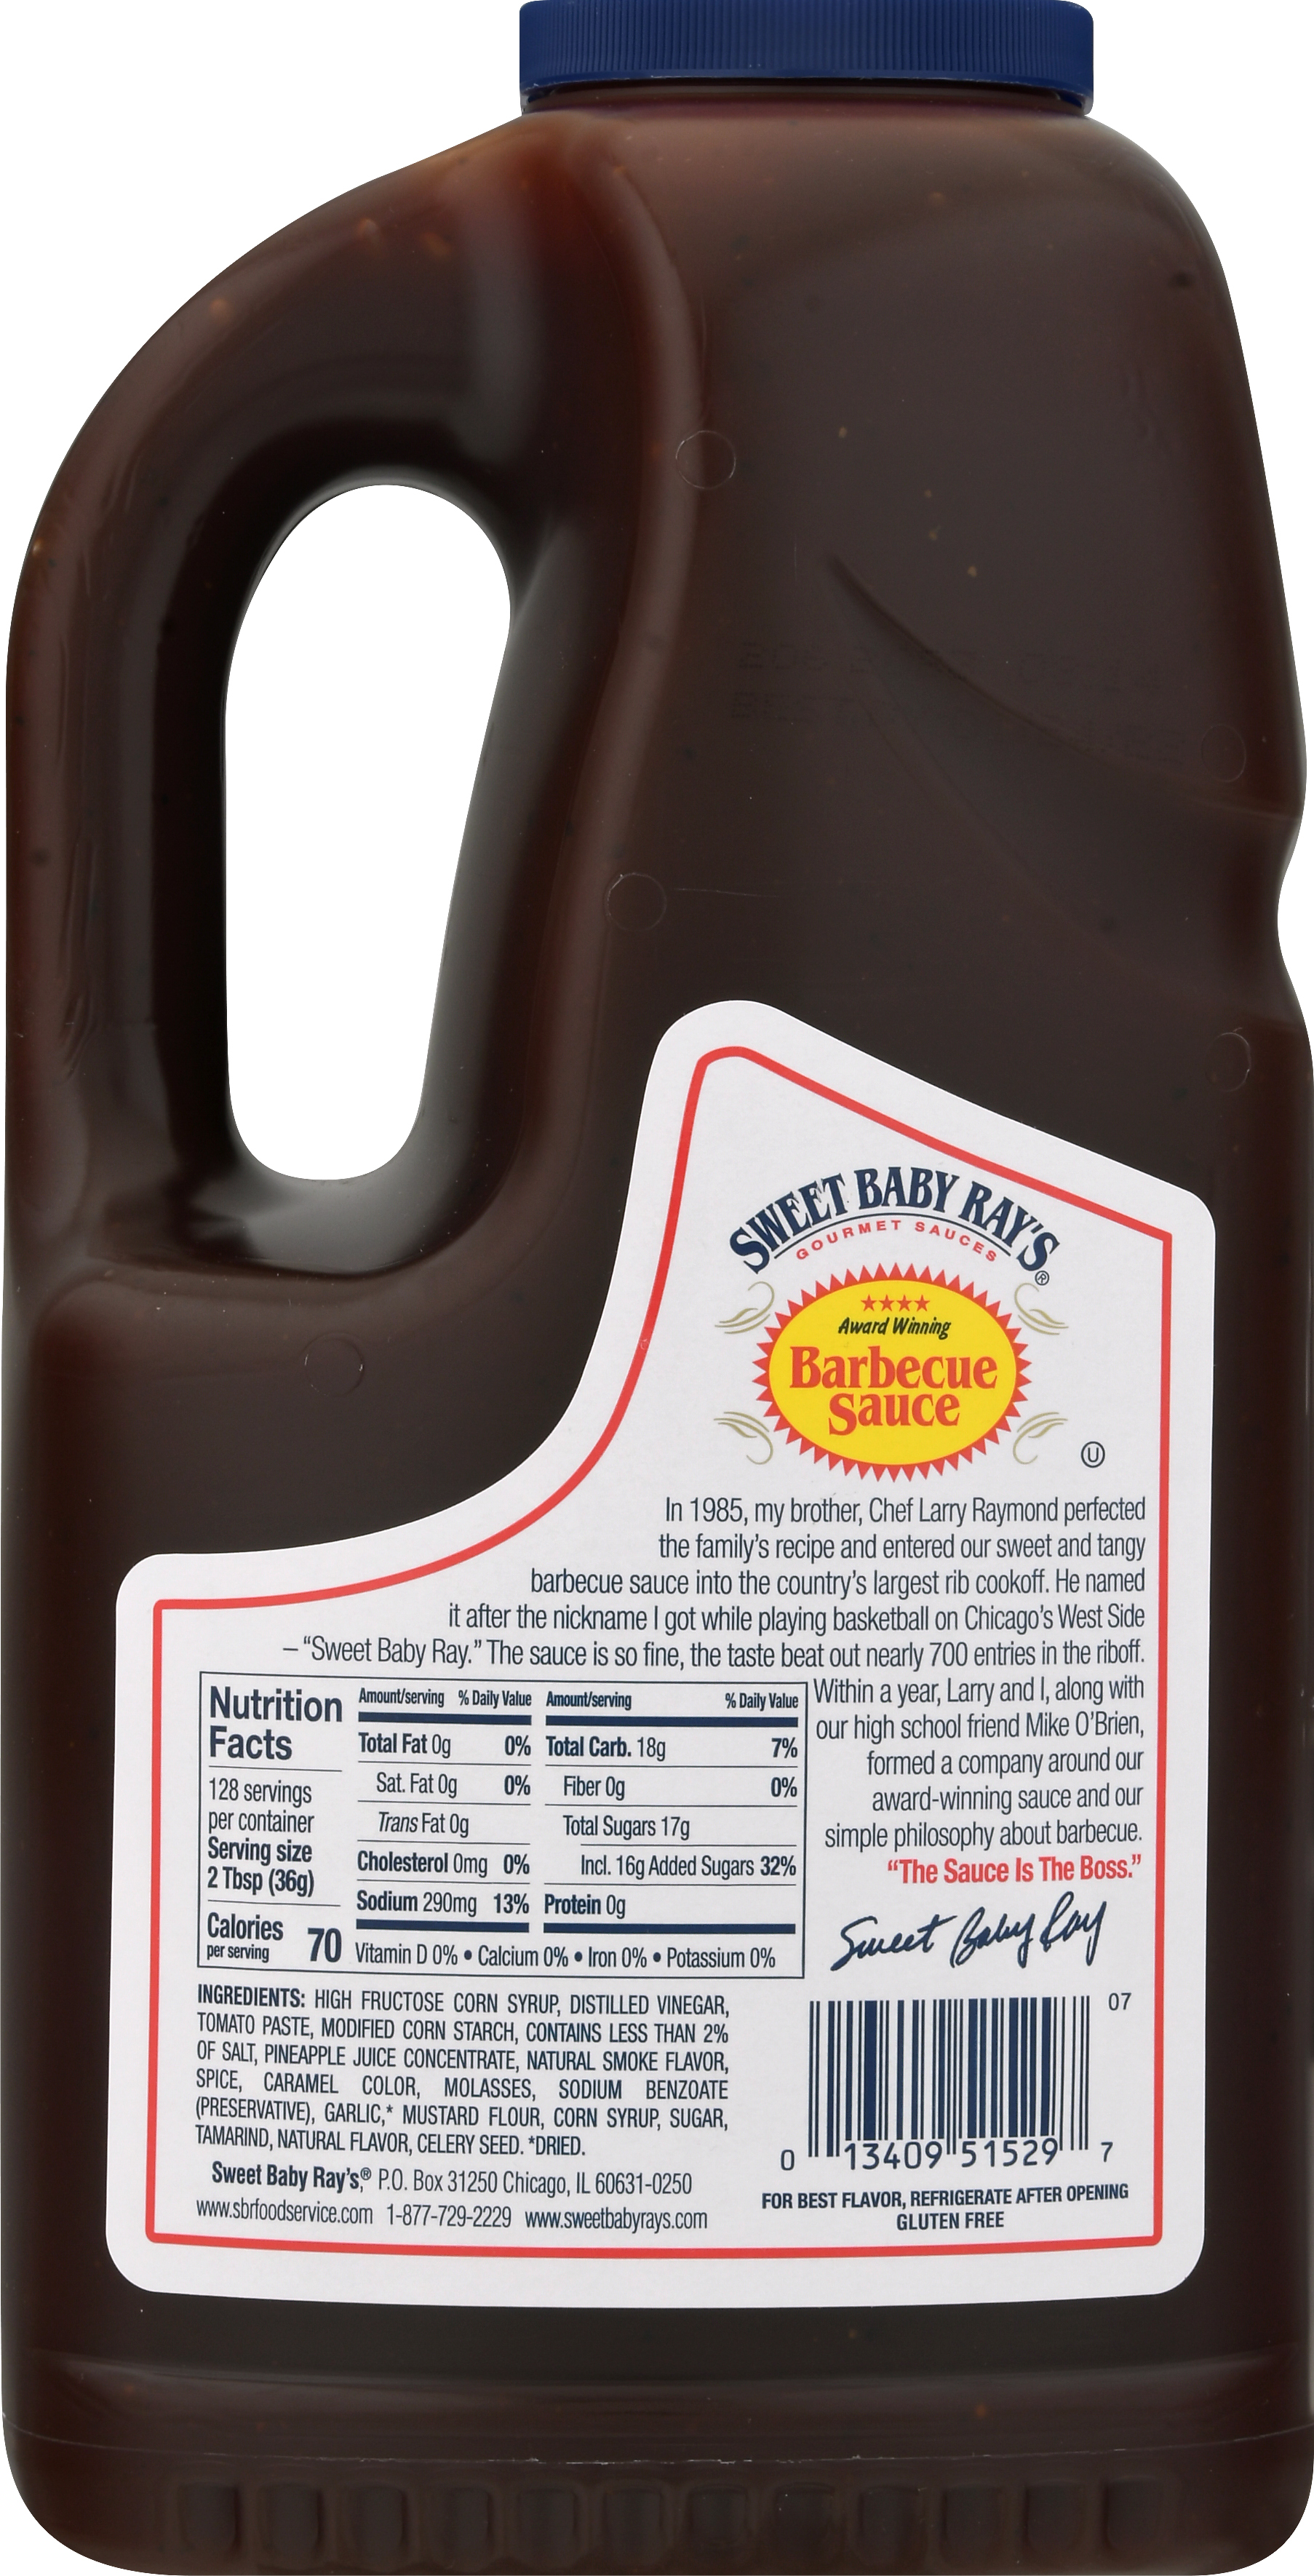 Sweet Baby Ray's Original Barbecue Sauce 1 gal - image 2 of 4